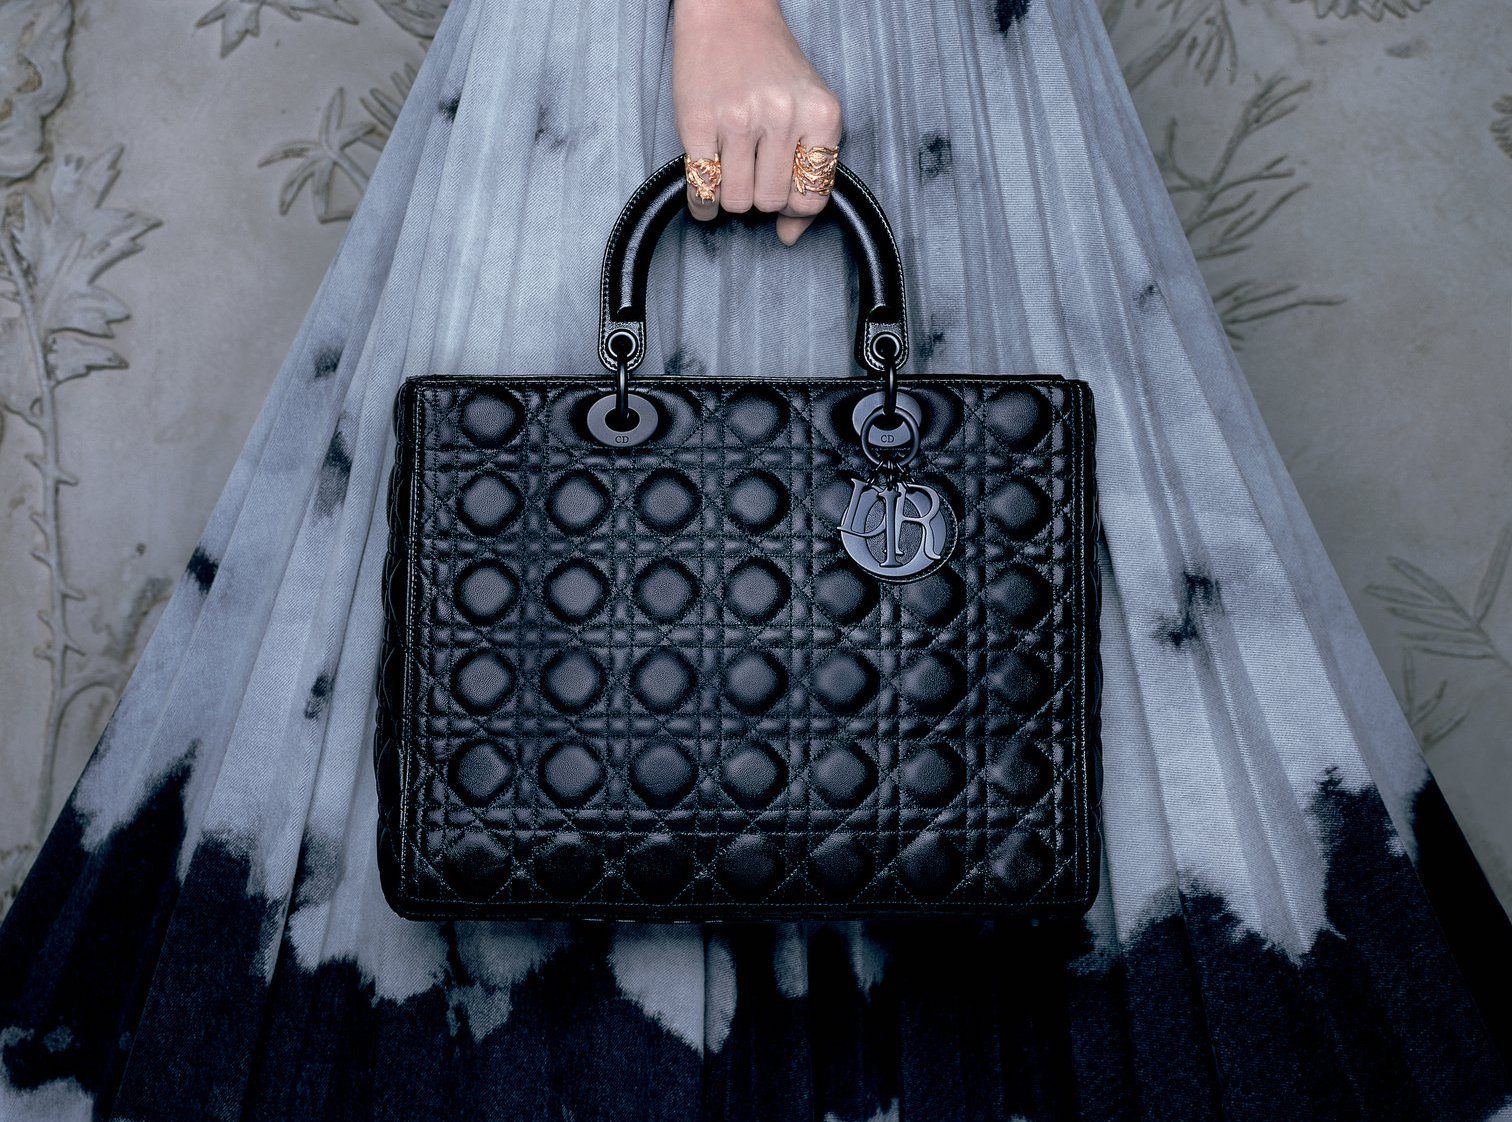 Lady Dior bag is back in vogue and here is how you can own it